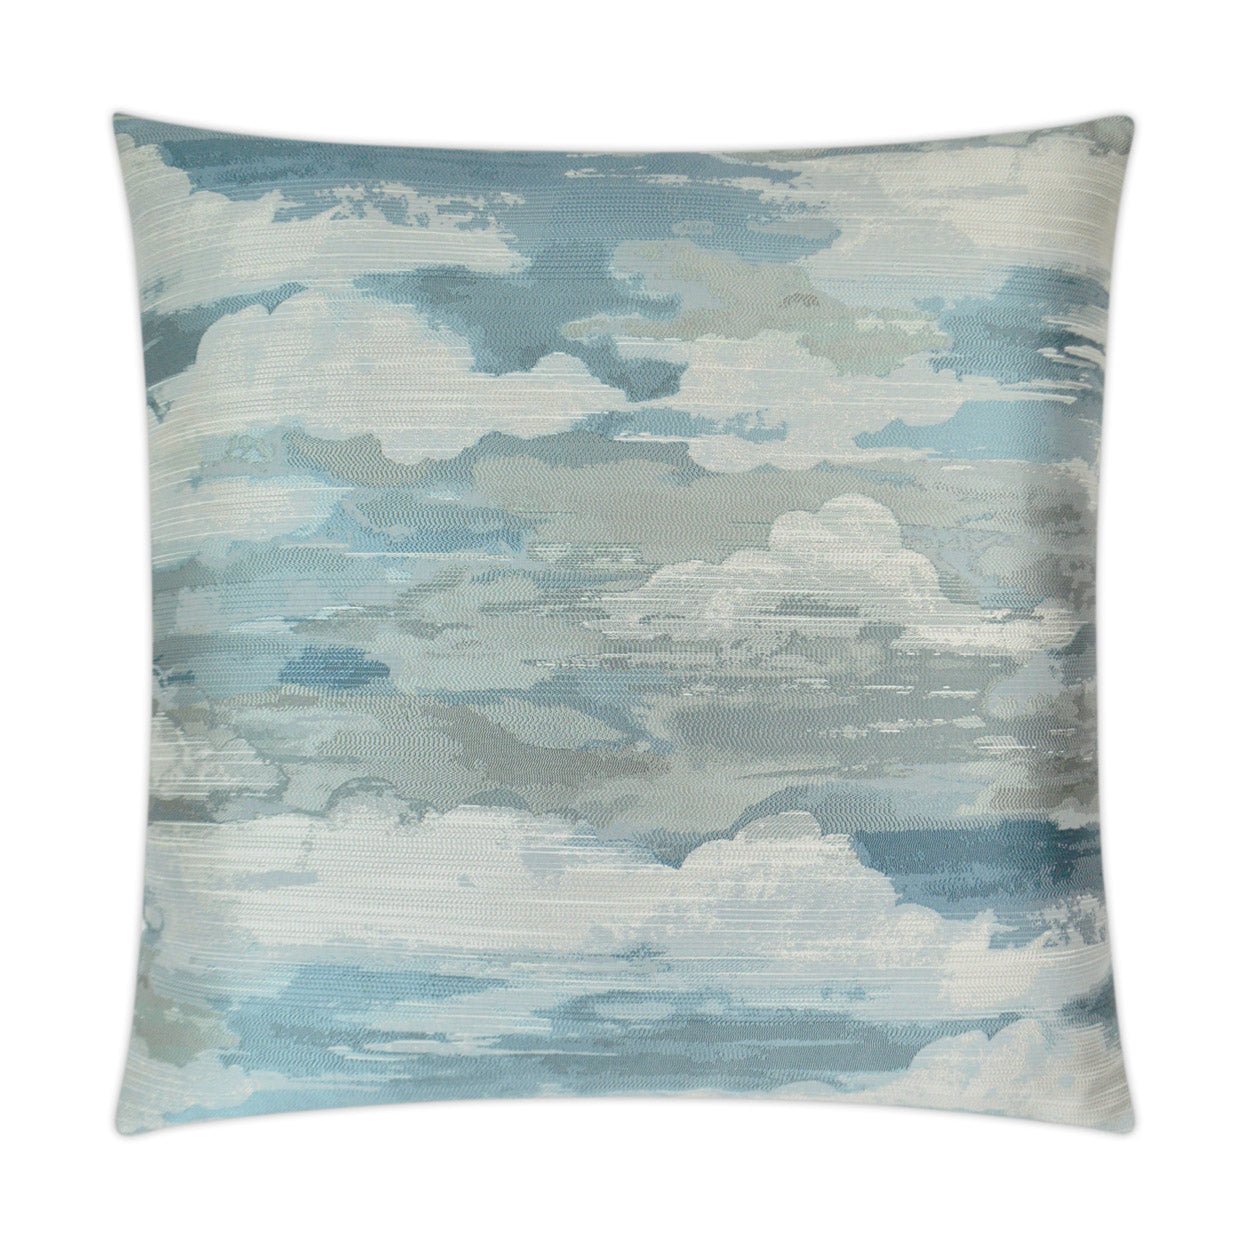 Luxury Pillow -  24" x 24" - Above the Clouds; Embroidered white and silver clouds drift across a sky blue ground